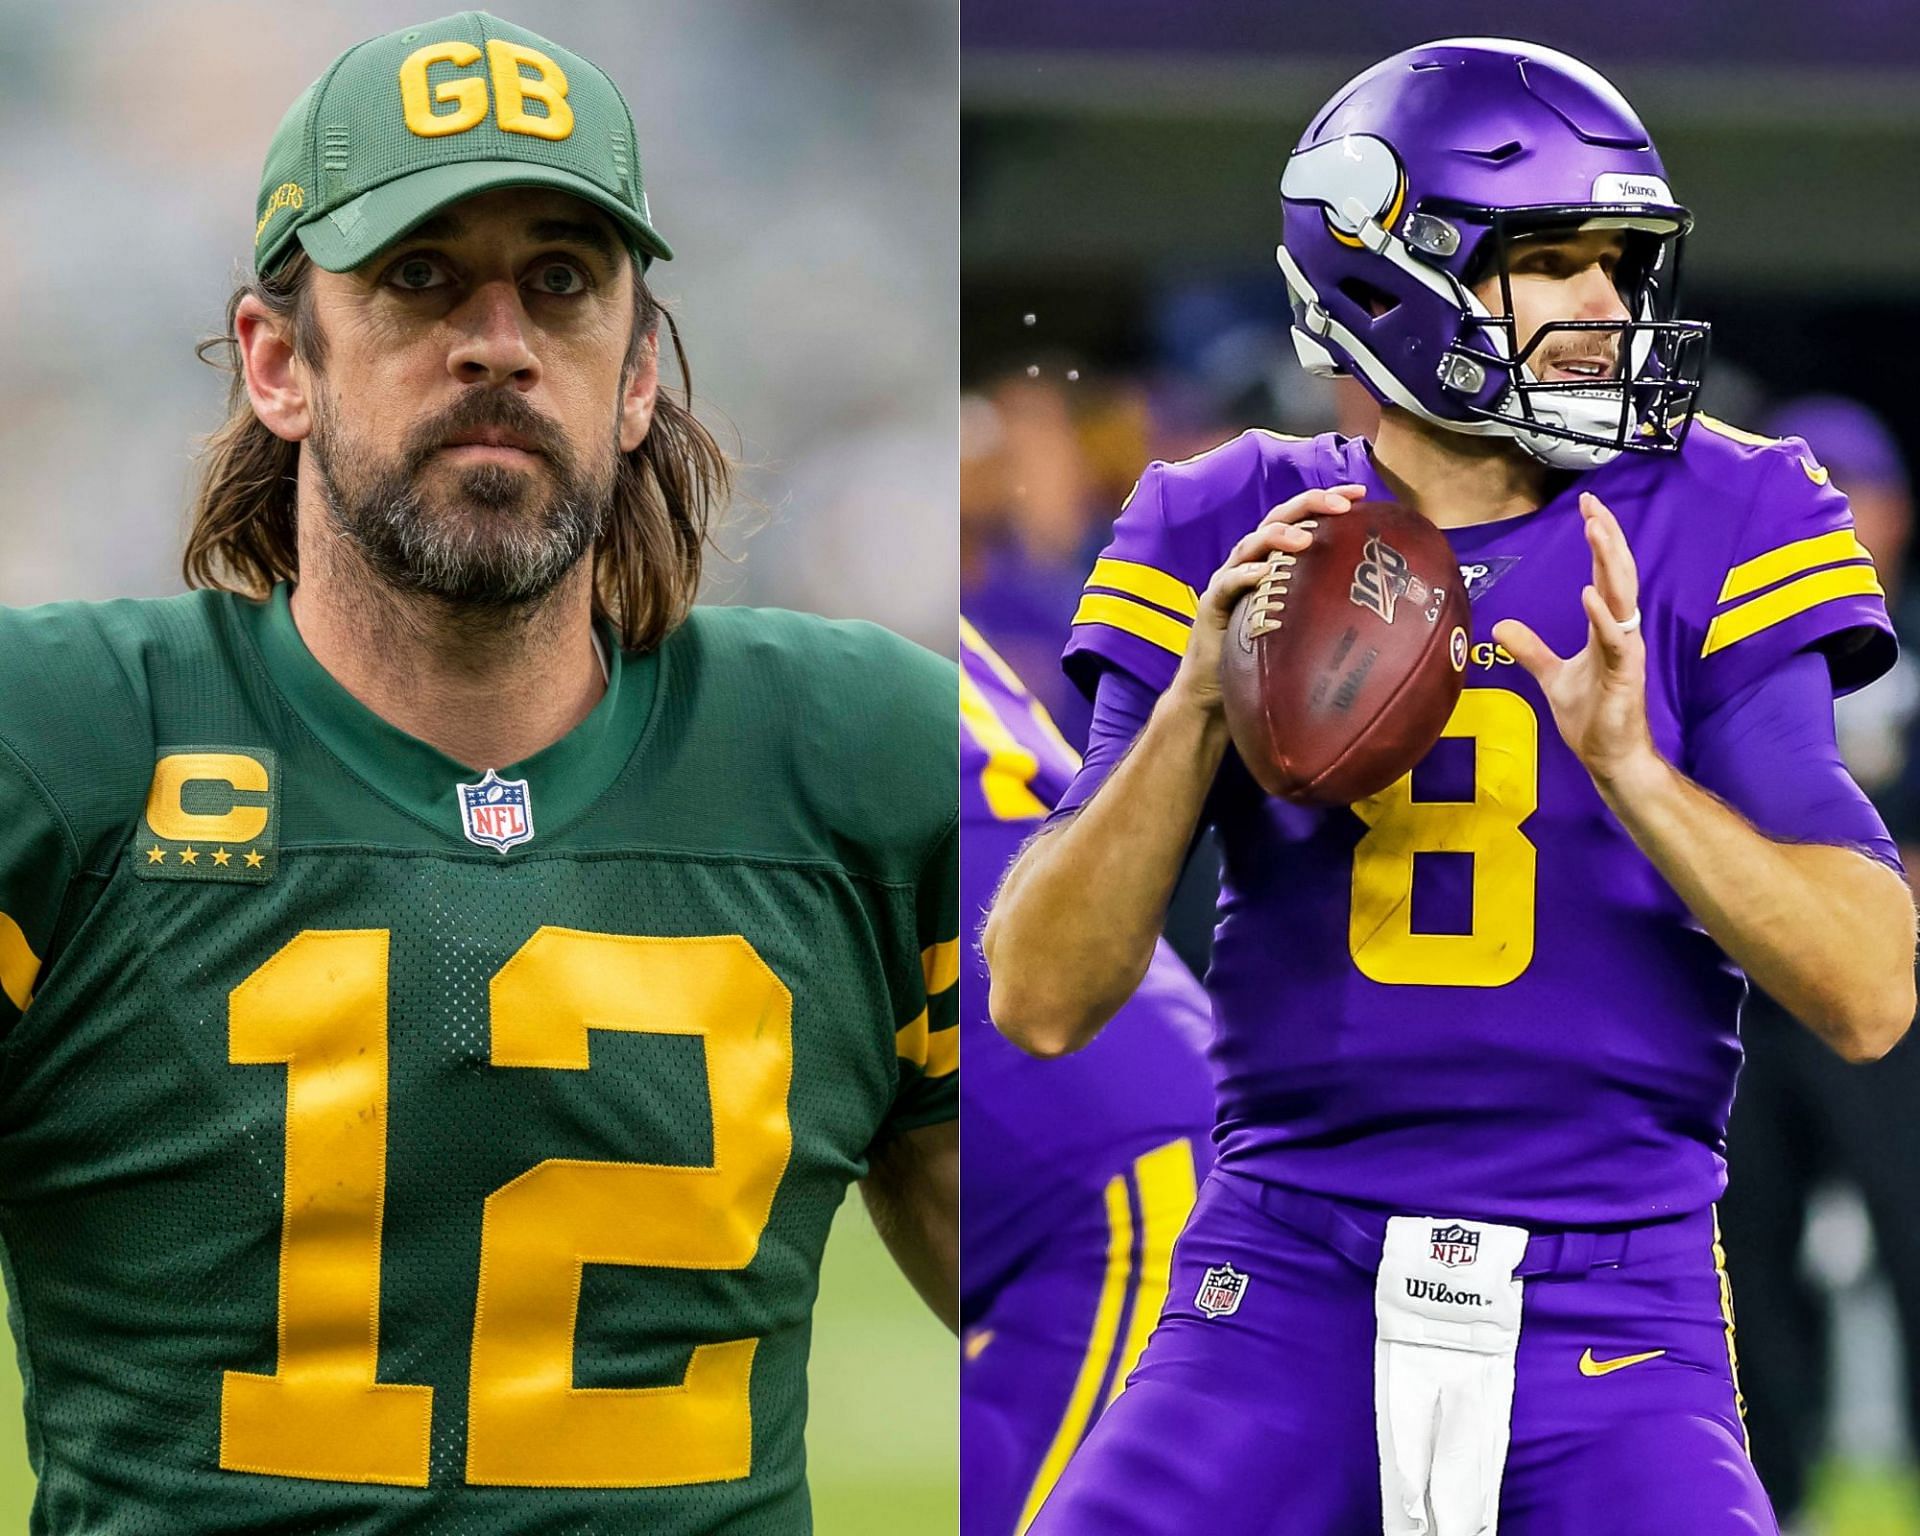 Aaron Rodgers vs. Kirk Cousins in fantasy football